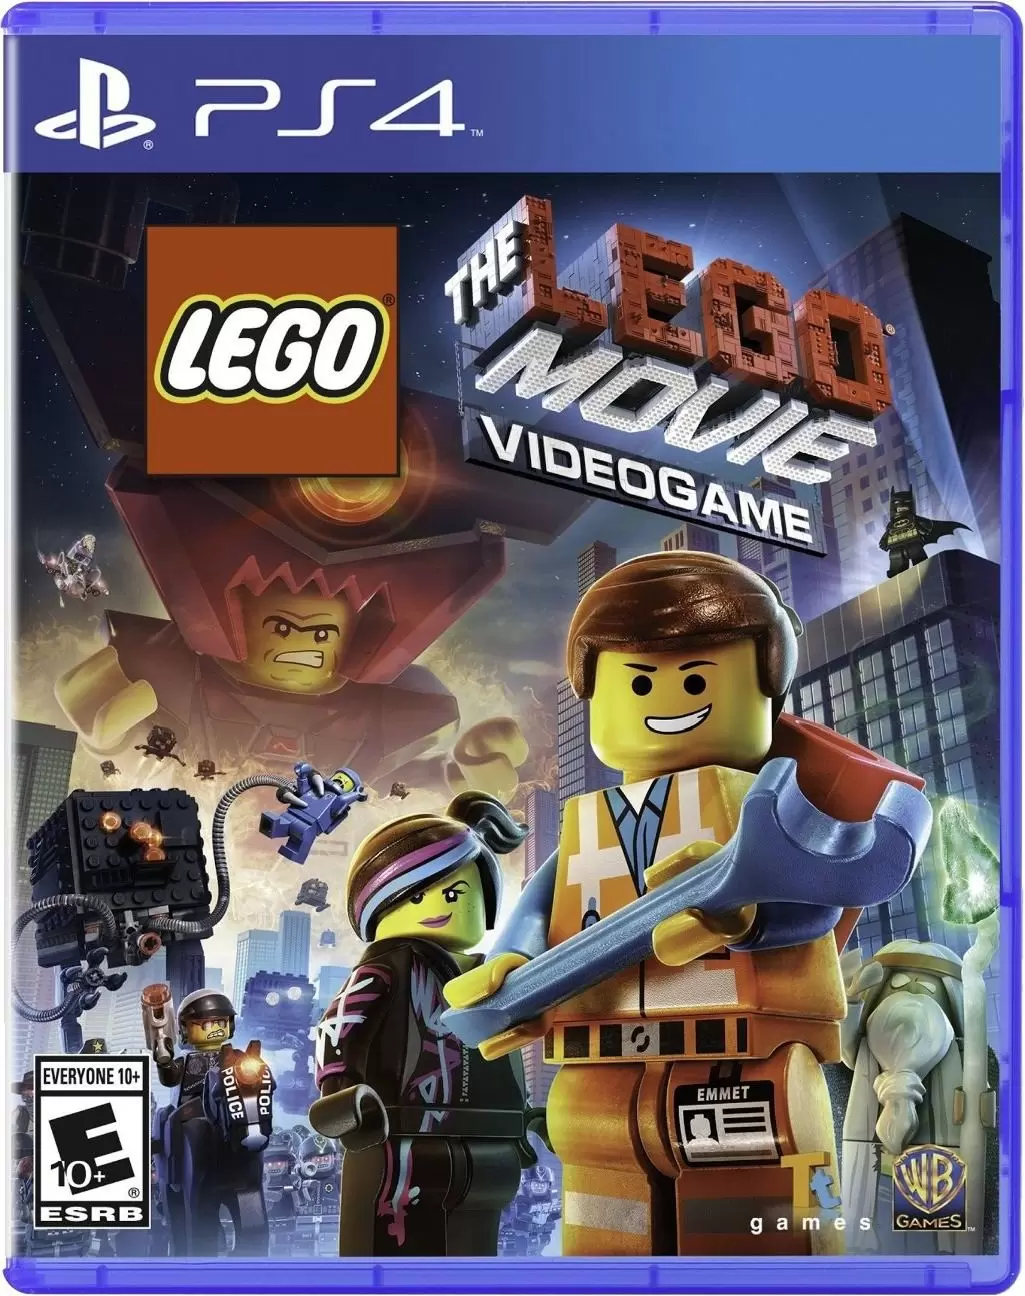 PS4 Games - The LEGO Movie Videogame